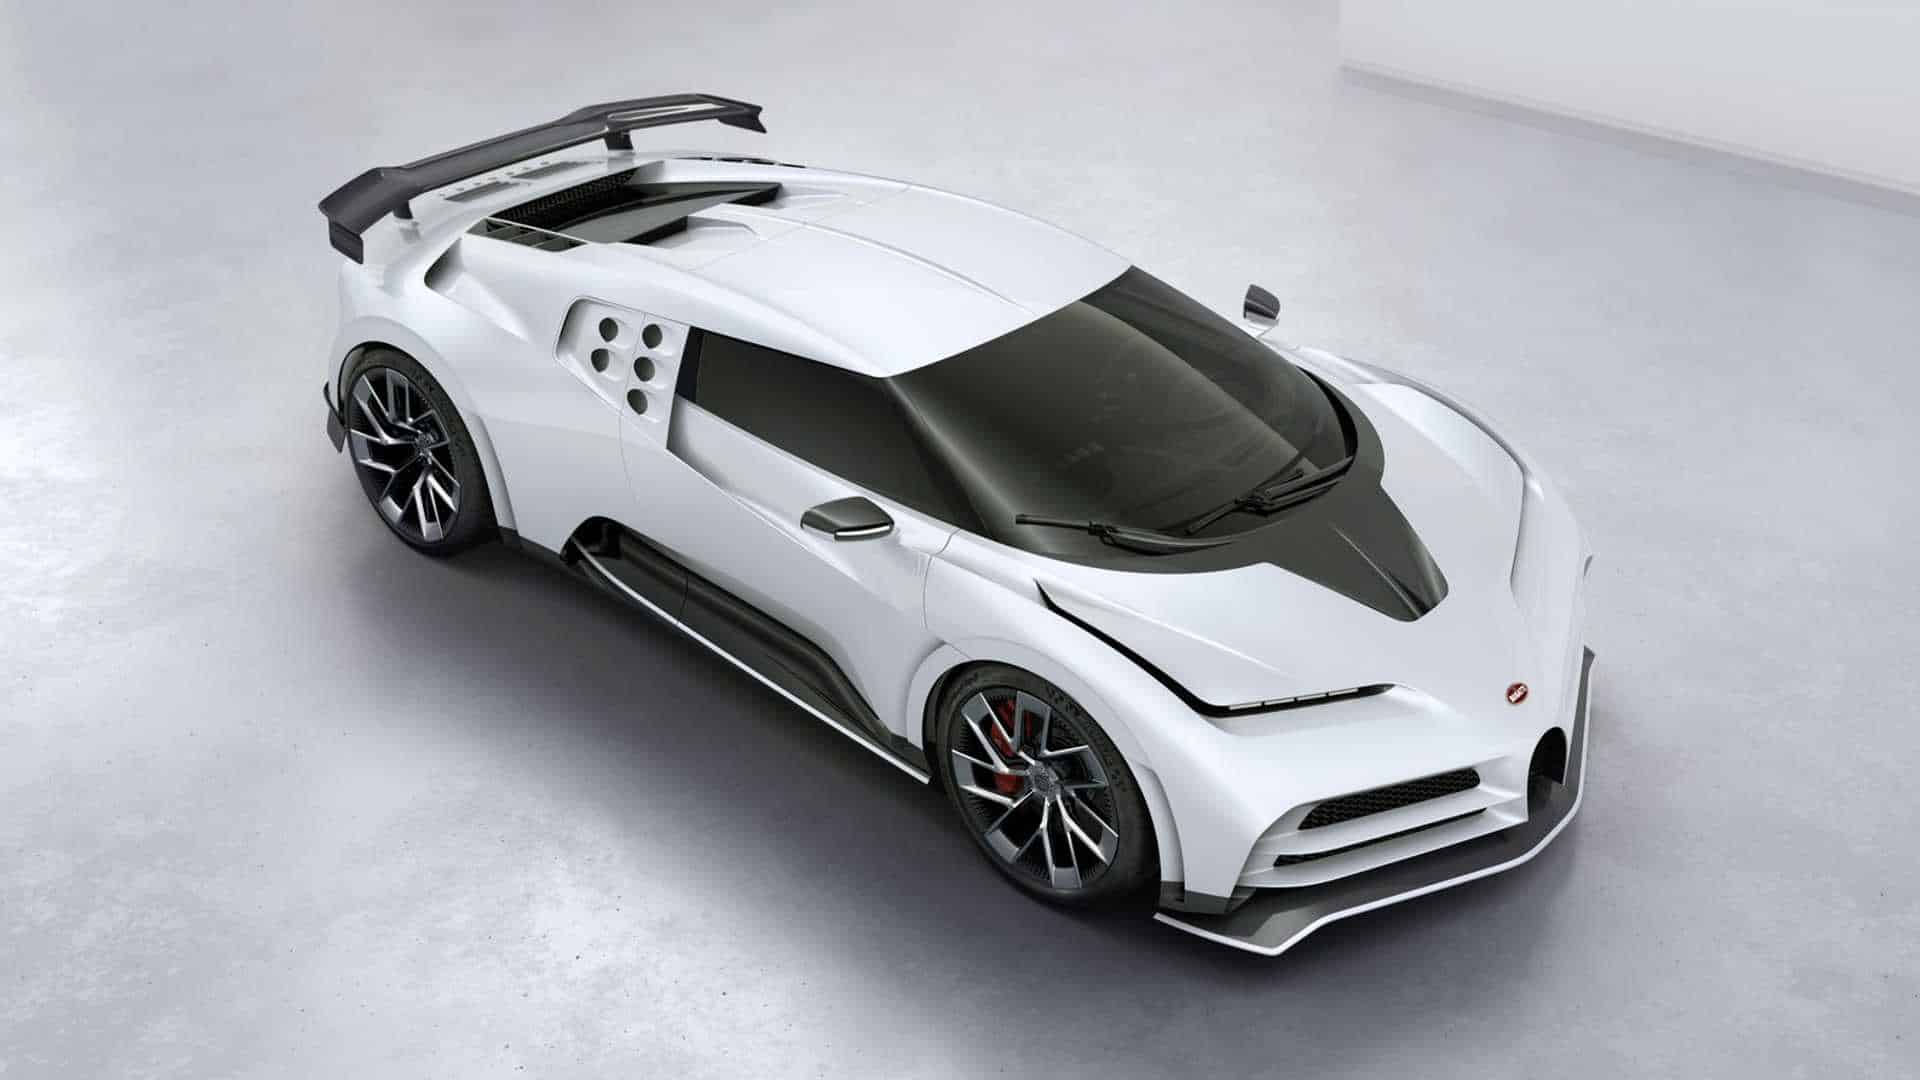 Centodieci is a lighter Chiron celebrating an earlier Bugatti icon